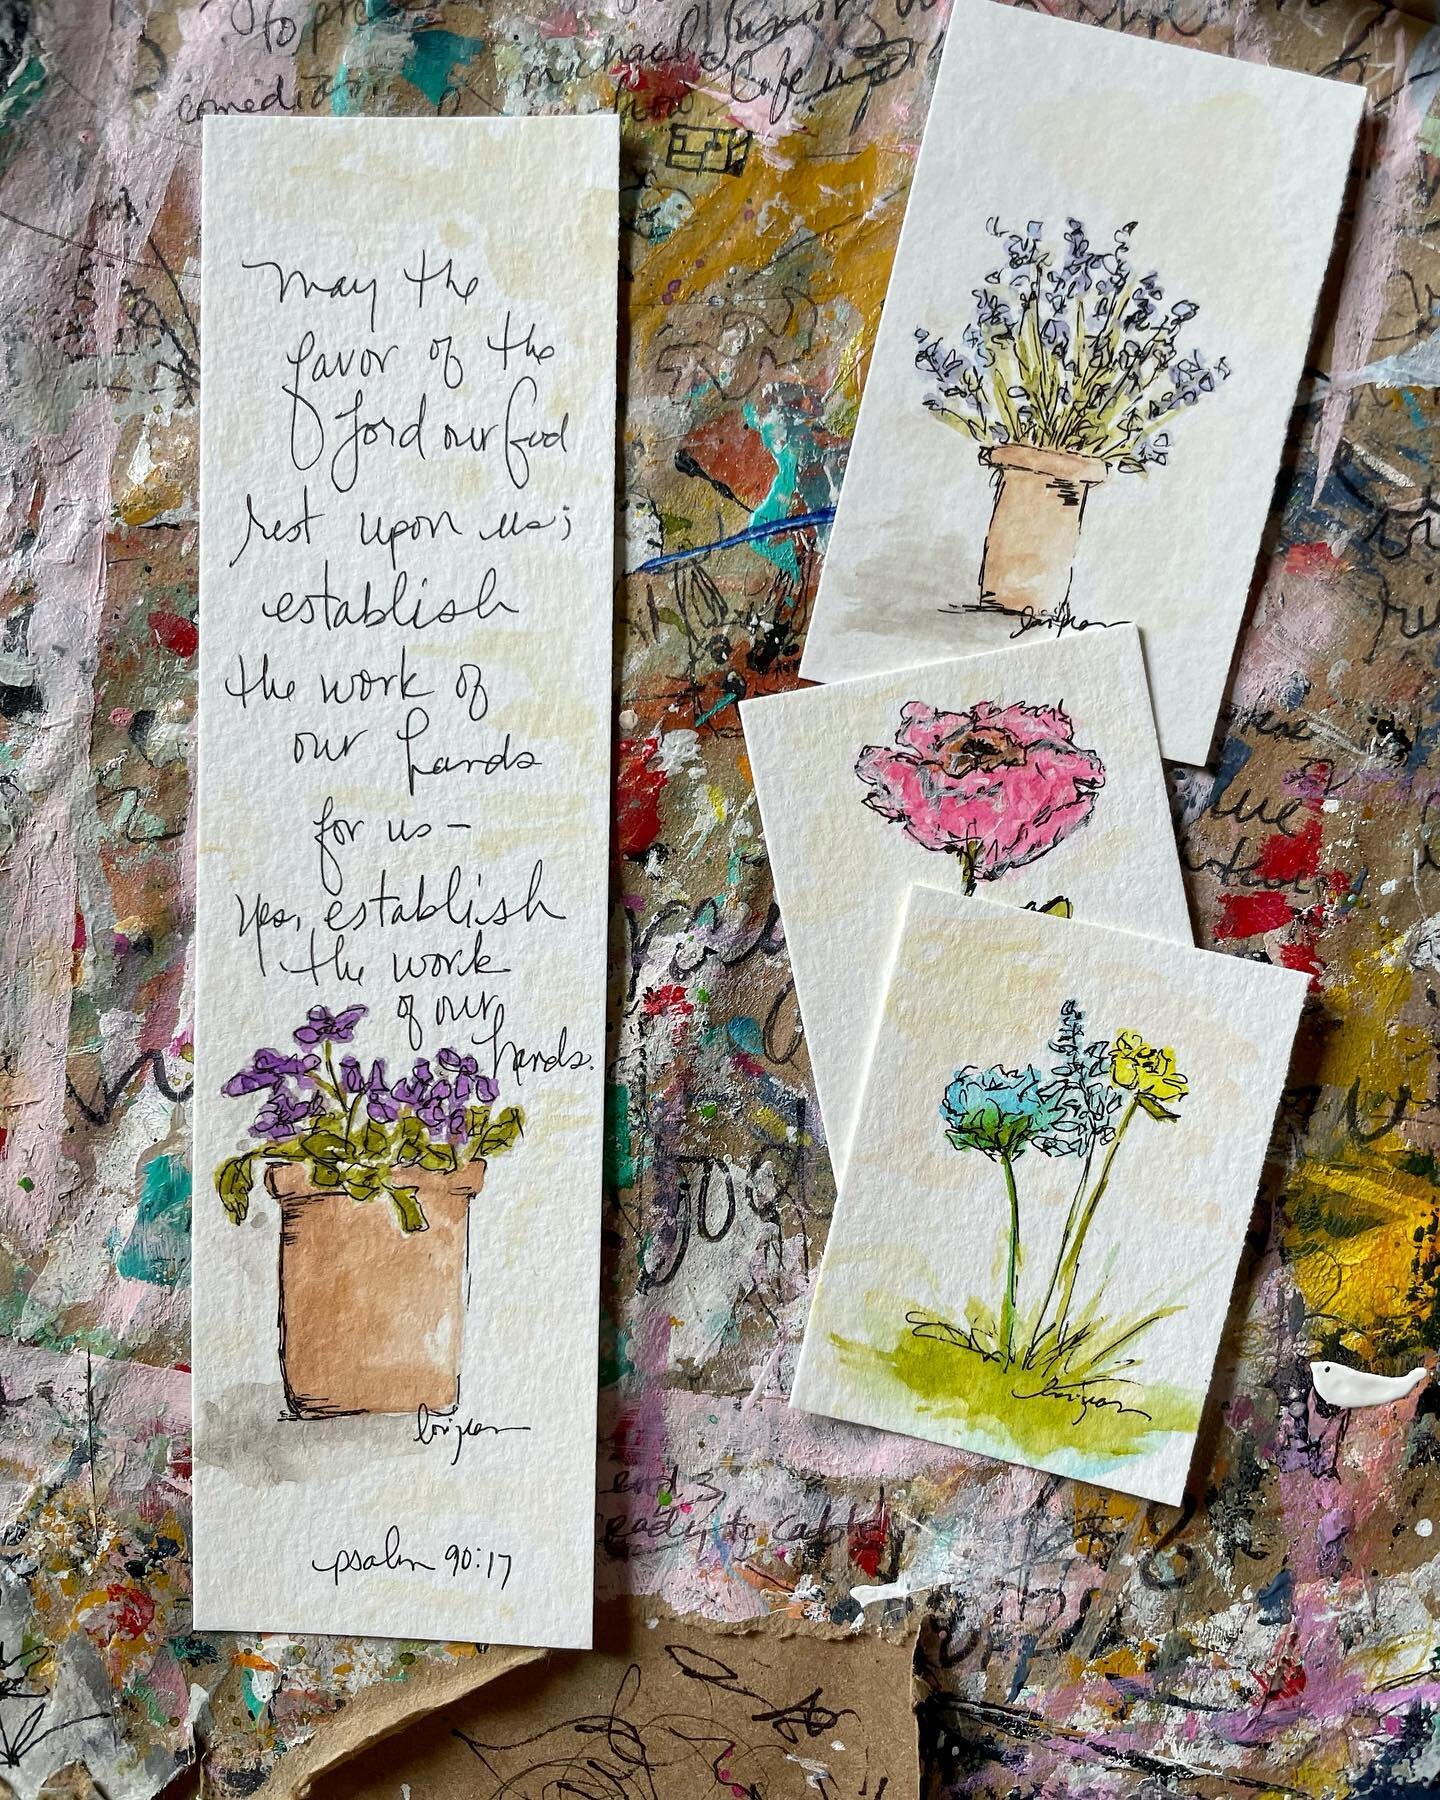 .
A Saturday blessing. I read this verse this morning and it just lingered in my heart and head. I hope it blesses you too.
.
#handoaintesdbookmarks #handpaintedbusinesscards #justcreate #becreativechallenge2021 #thelorijean #watercolorandink